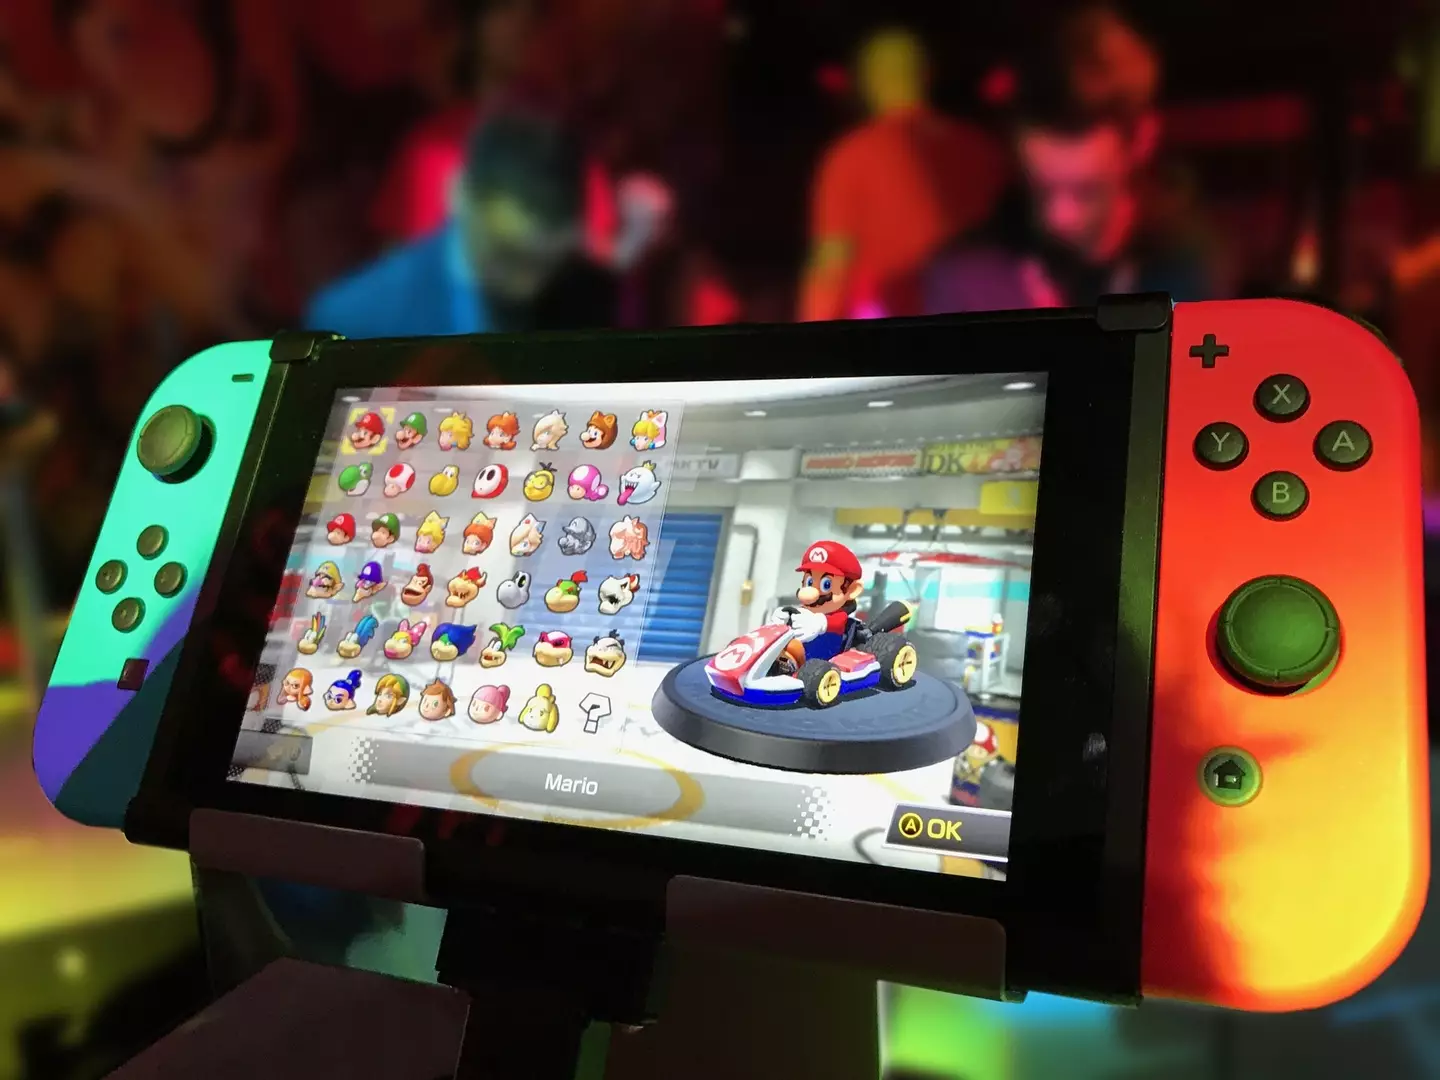 Bowser's group hacked Nintendo Switch.